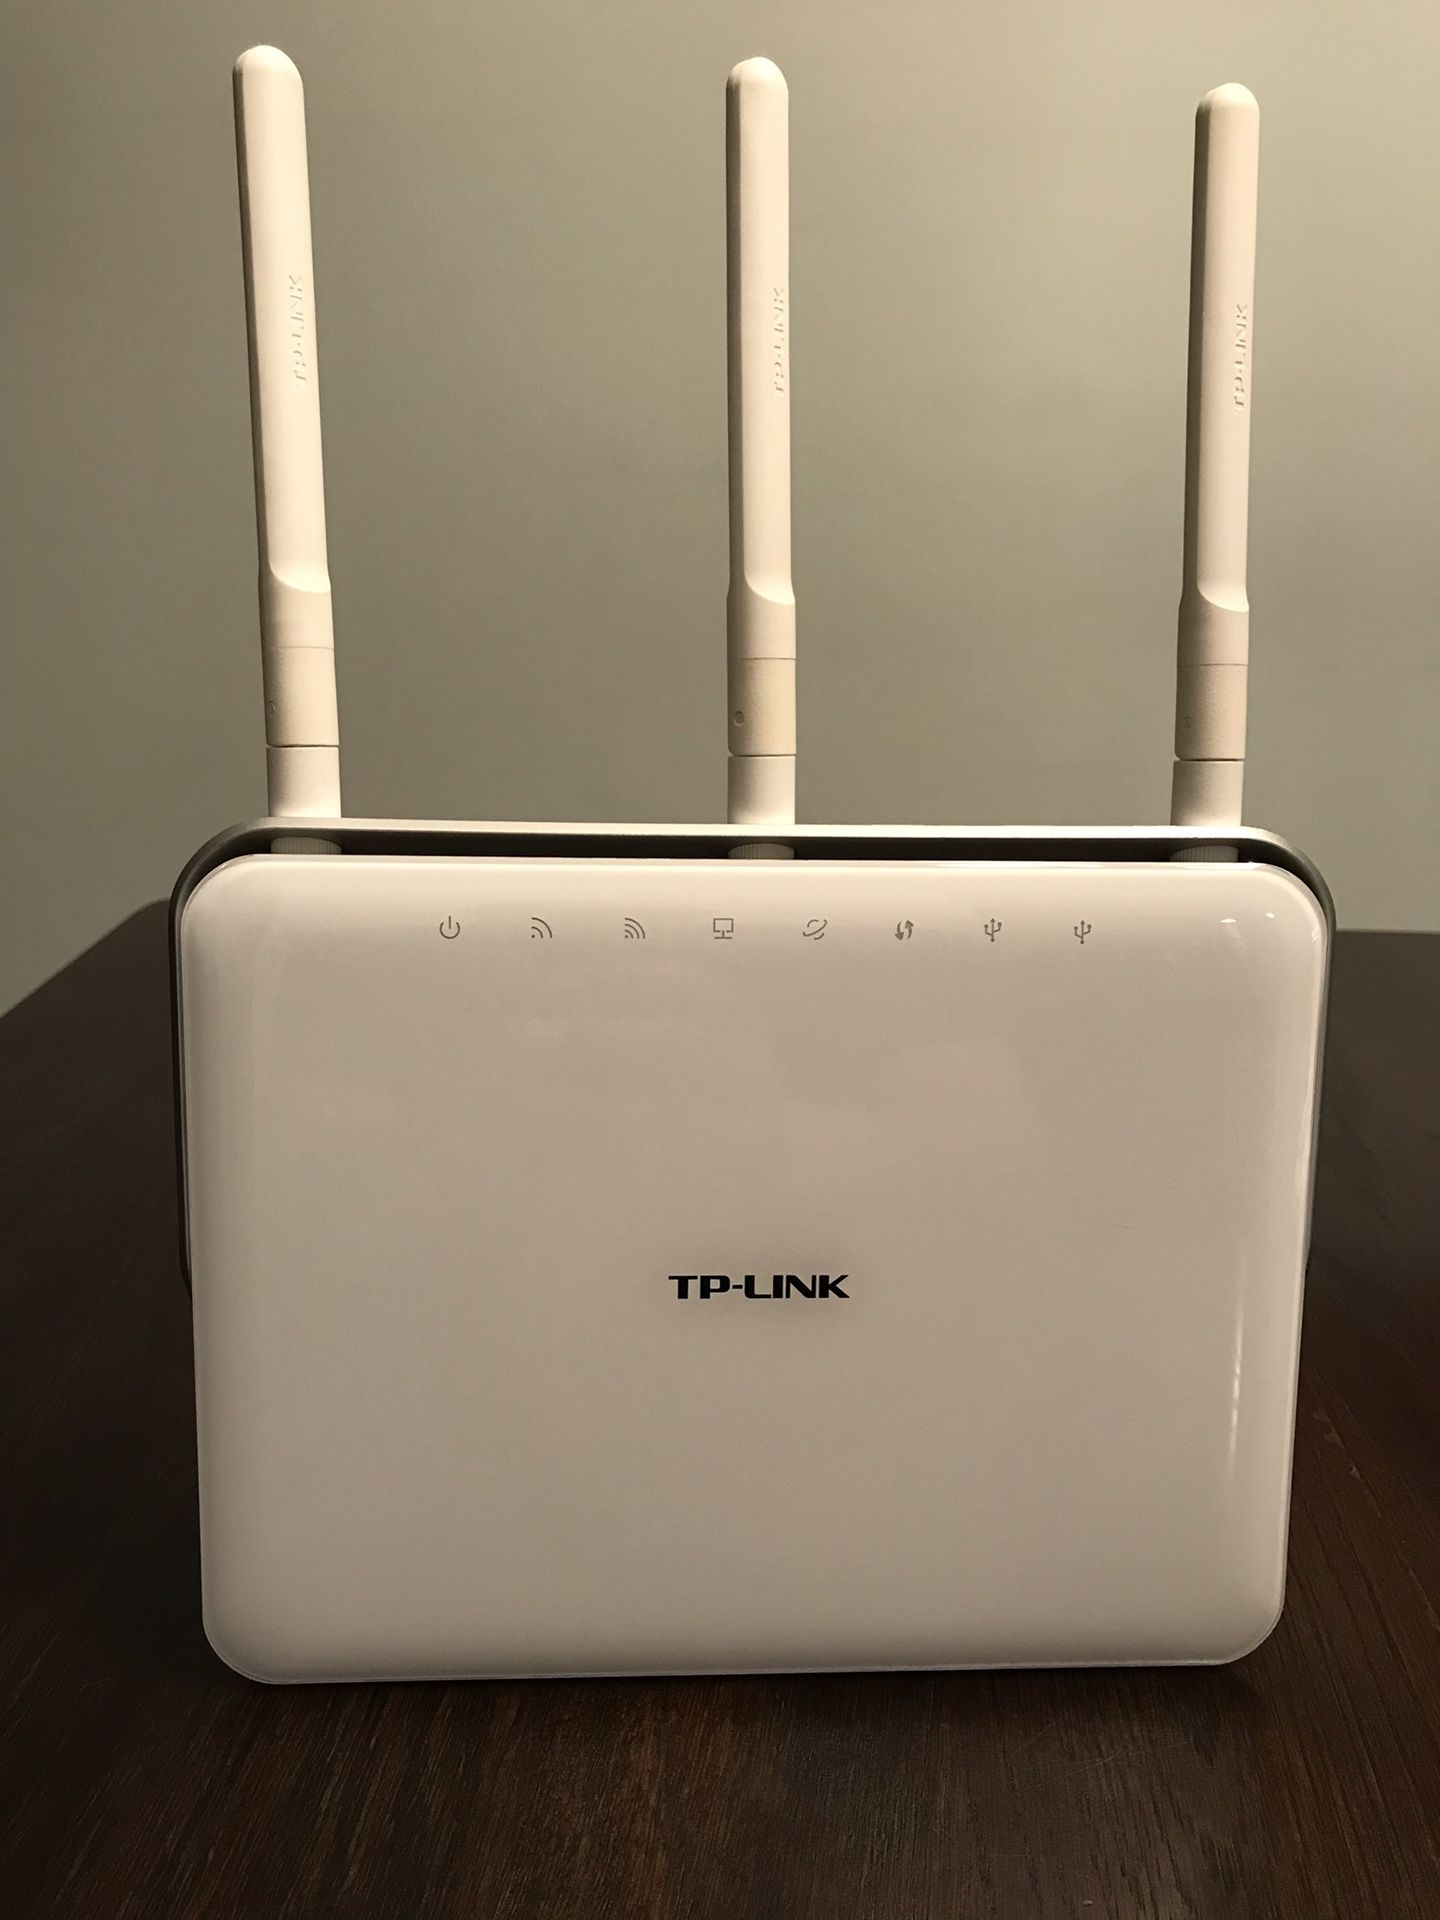 TP-LINK Dual Band Wireless Router